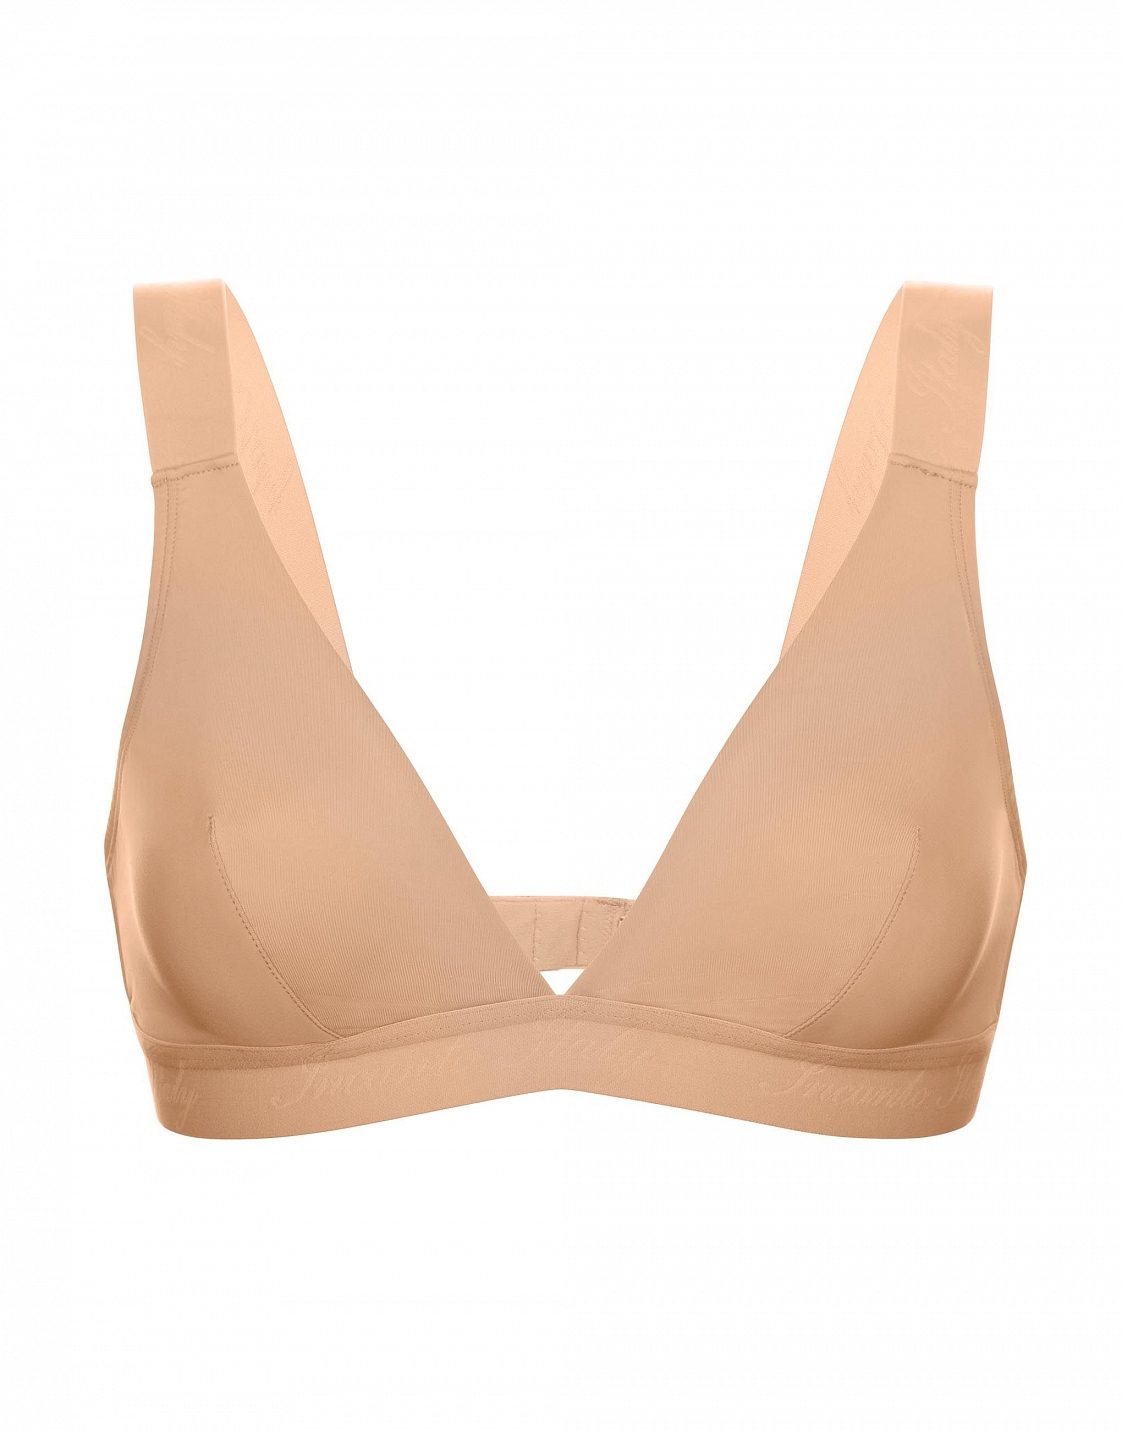 QOHNK 3D Bras Non-Underwire Push-up Bra Skin-Friendly Cotton Front Opening  Thin BRAU-Shaped Back (as1, Alpha, s, Regular, Regular, Black) at   Women's Clothing store